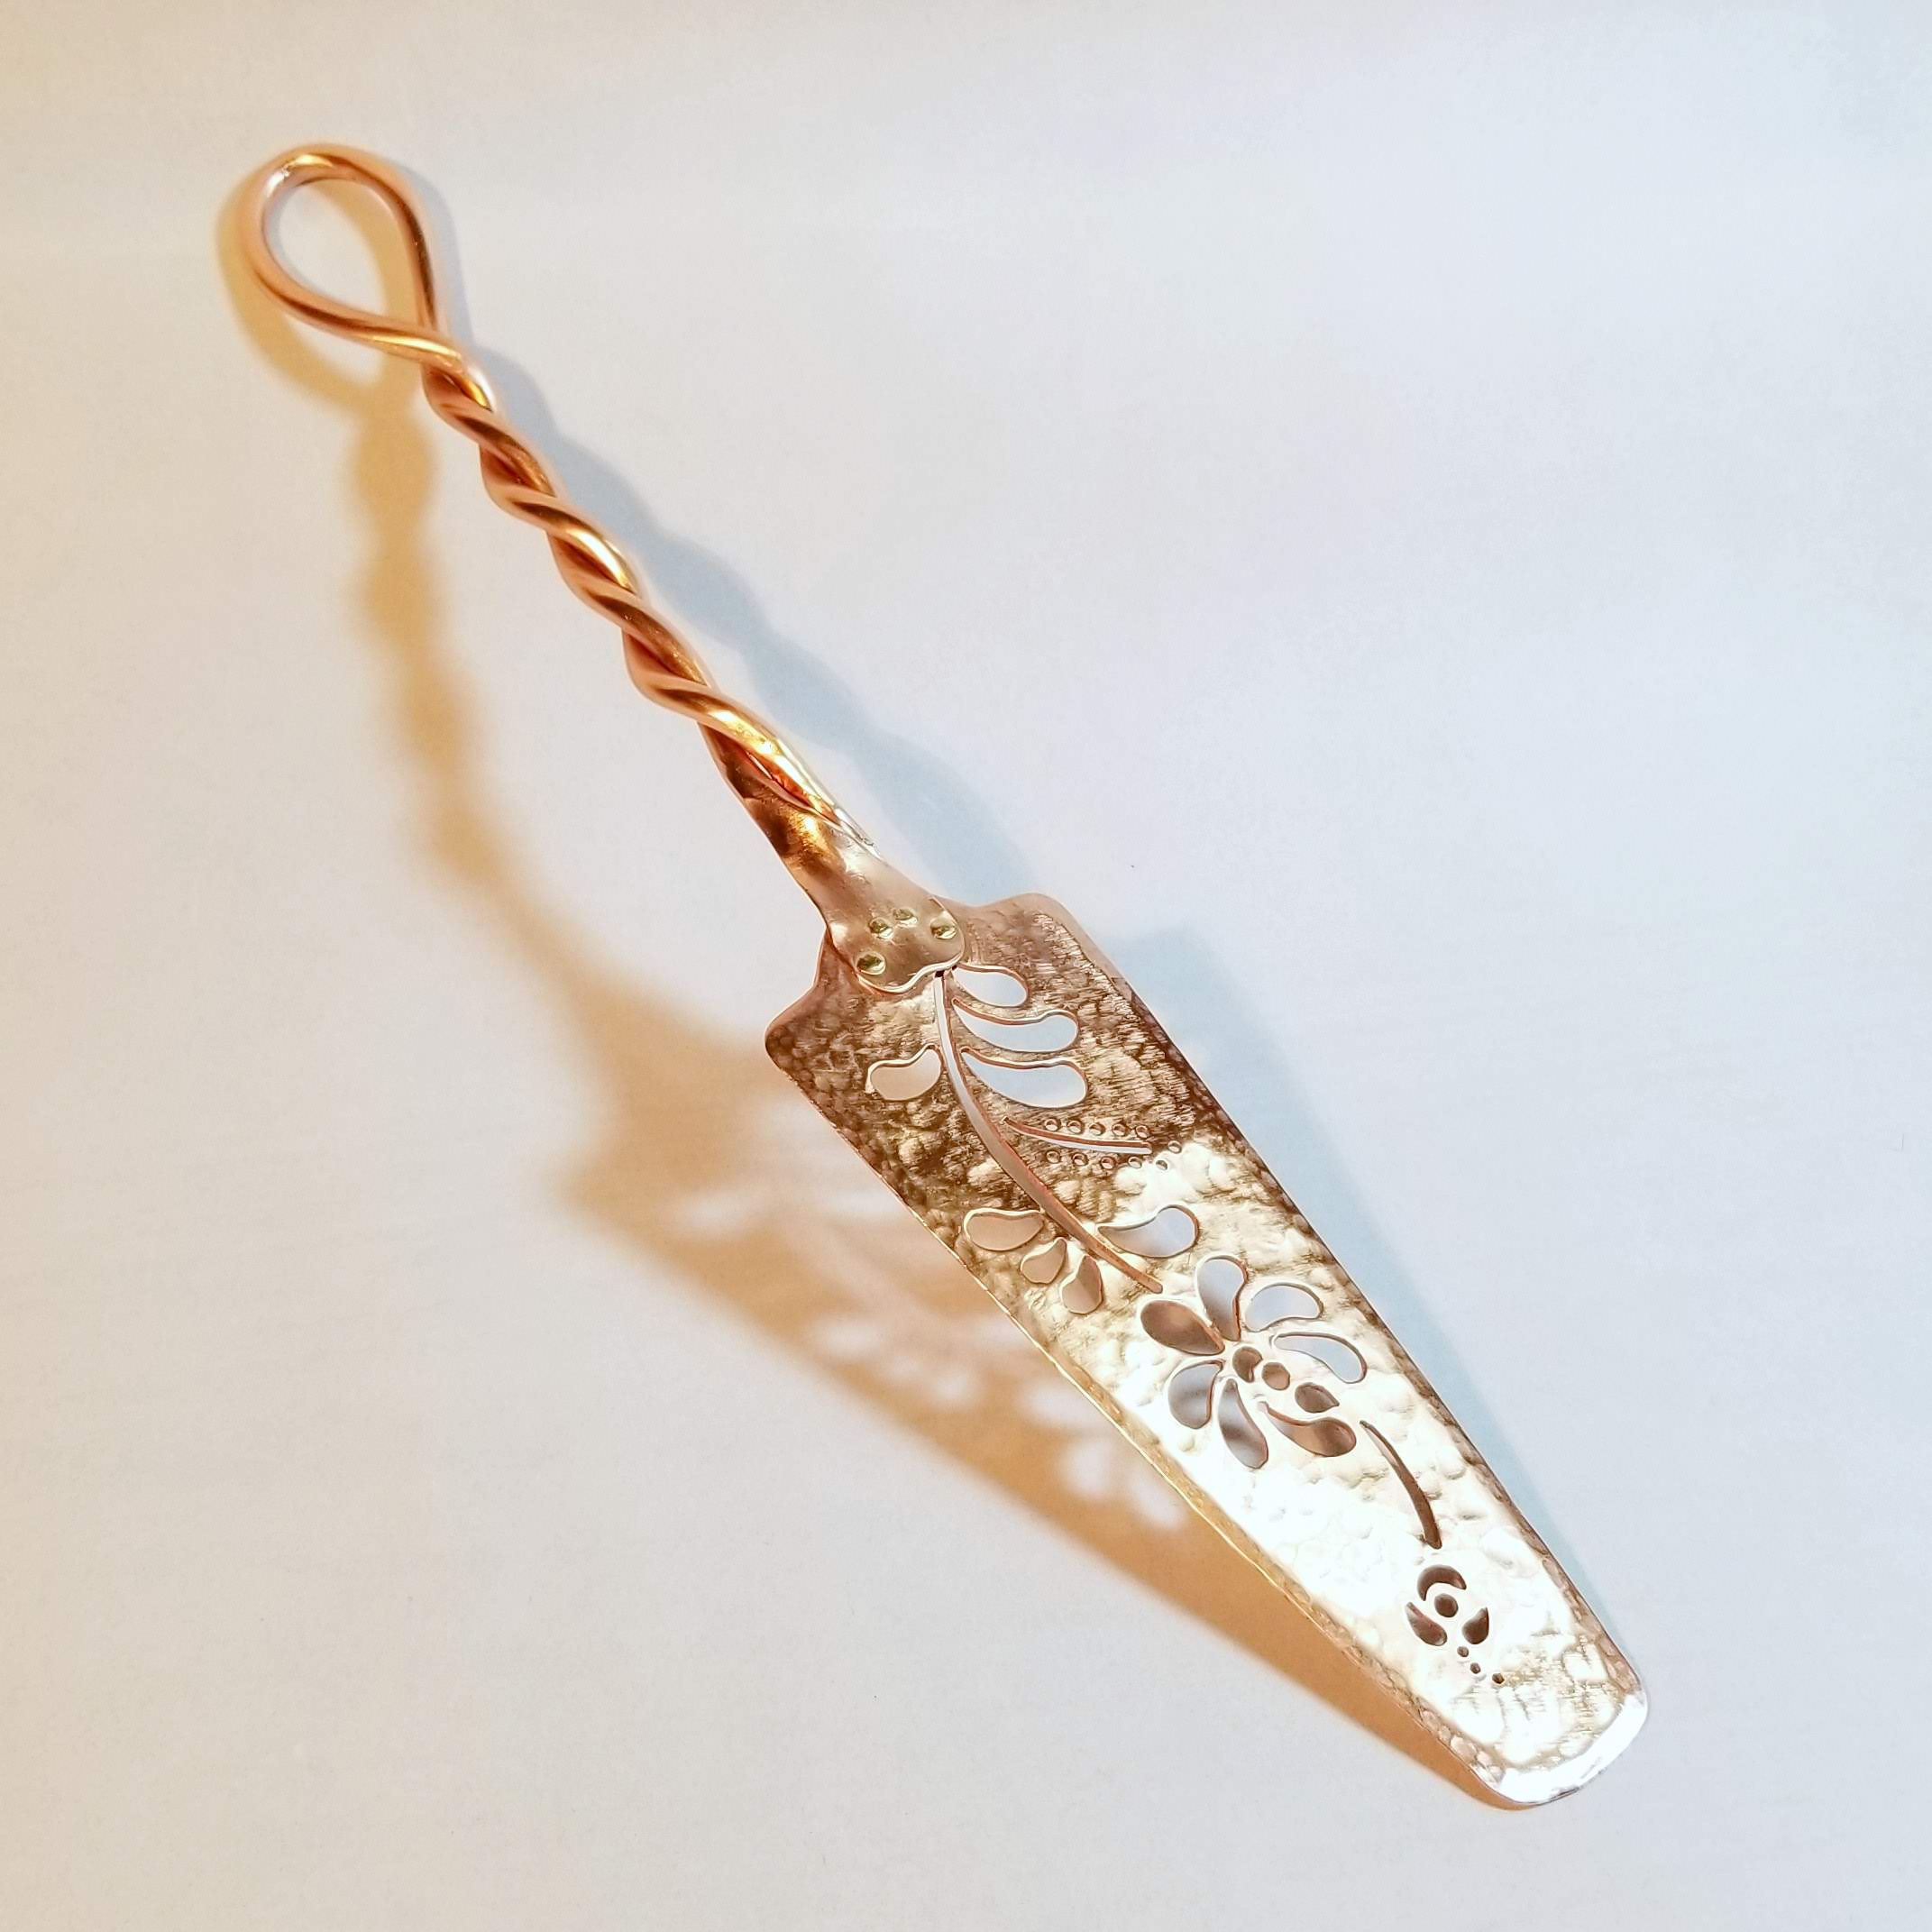 A copper cake server with pierced pattern